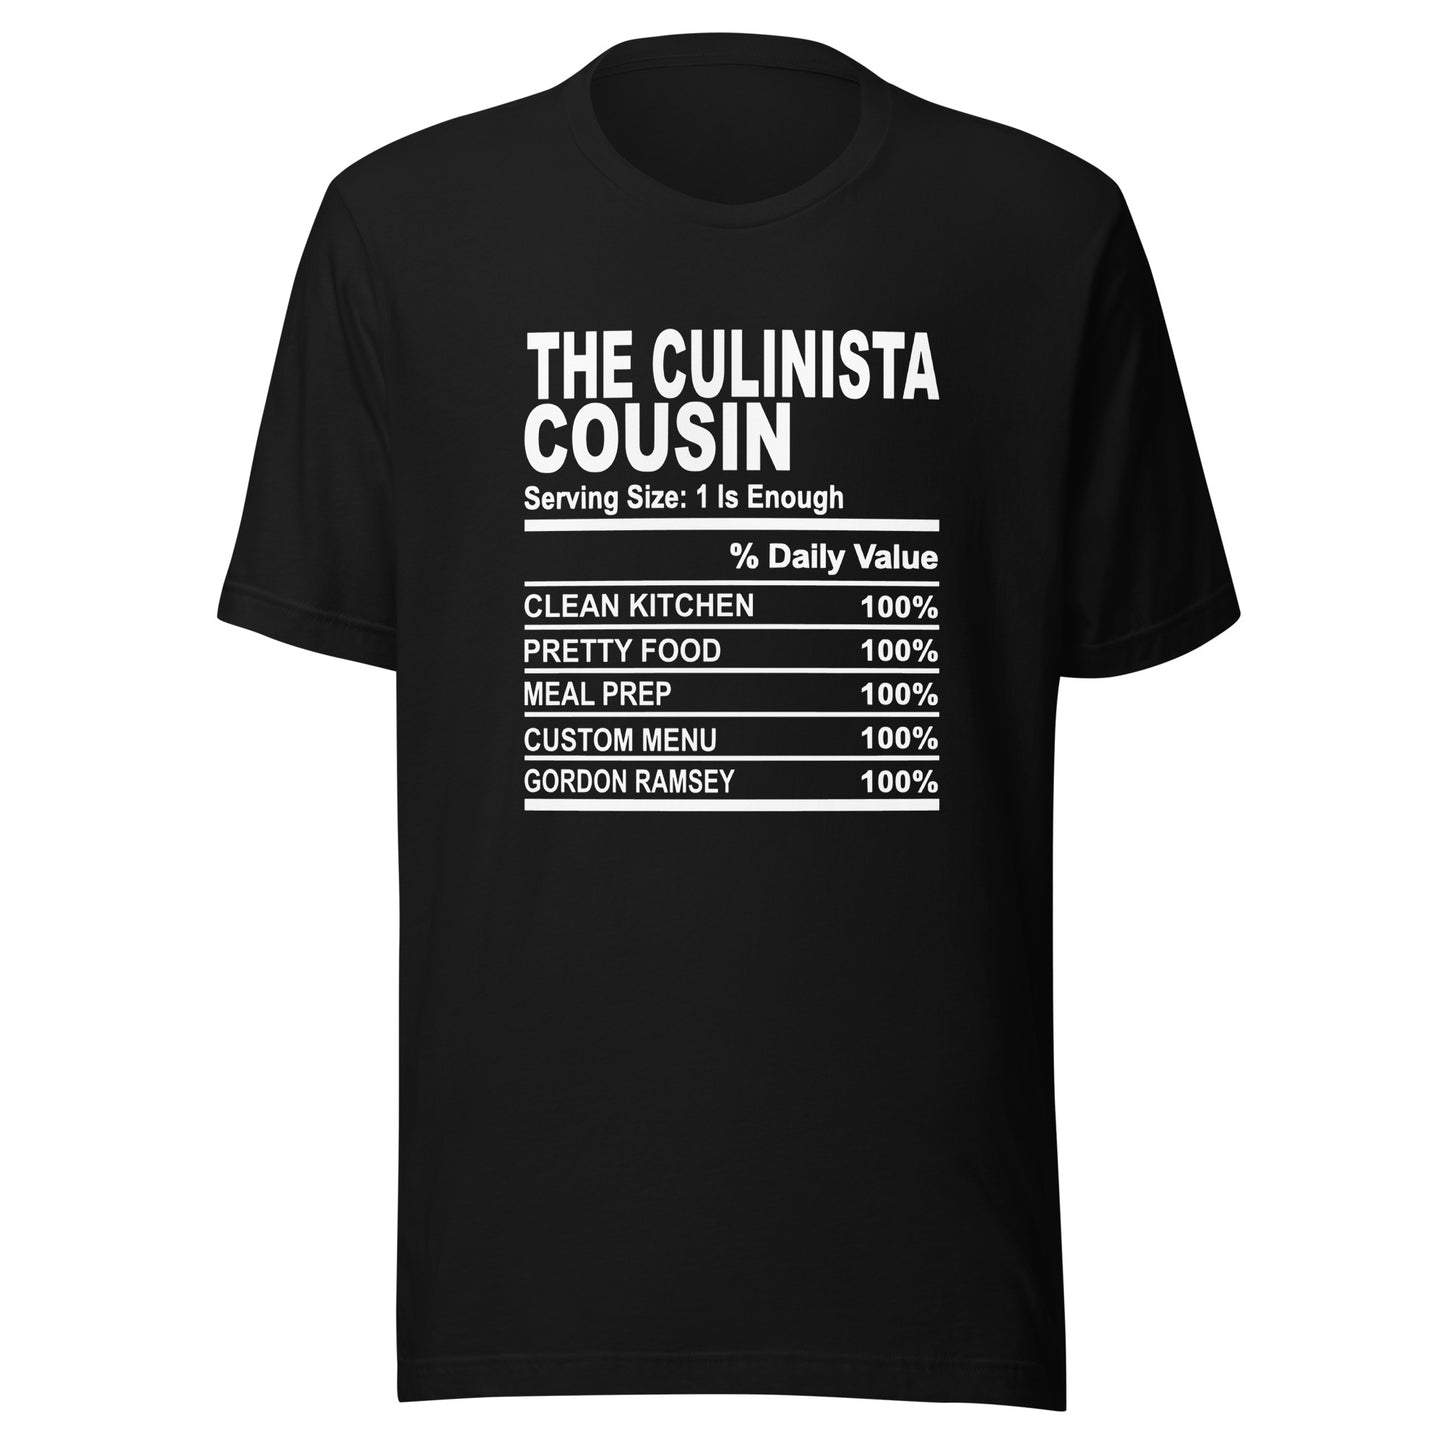 THE CULINISTA COUSIN - S-M - Unisex T-Shirt (white print)